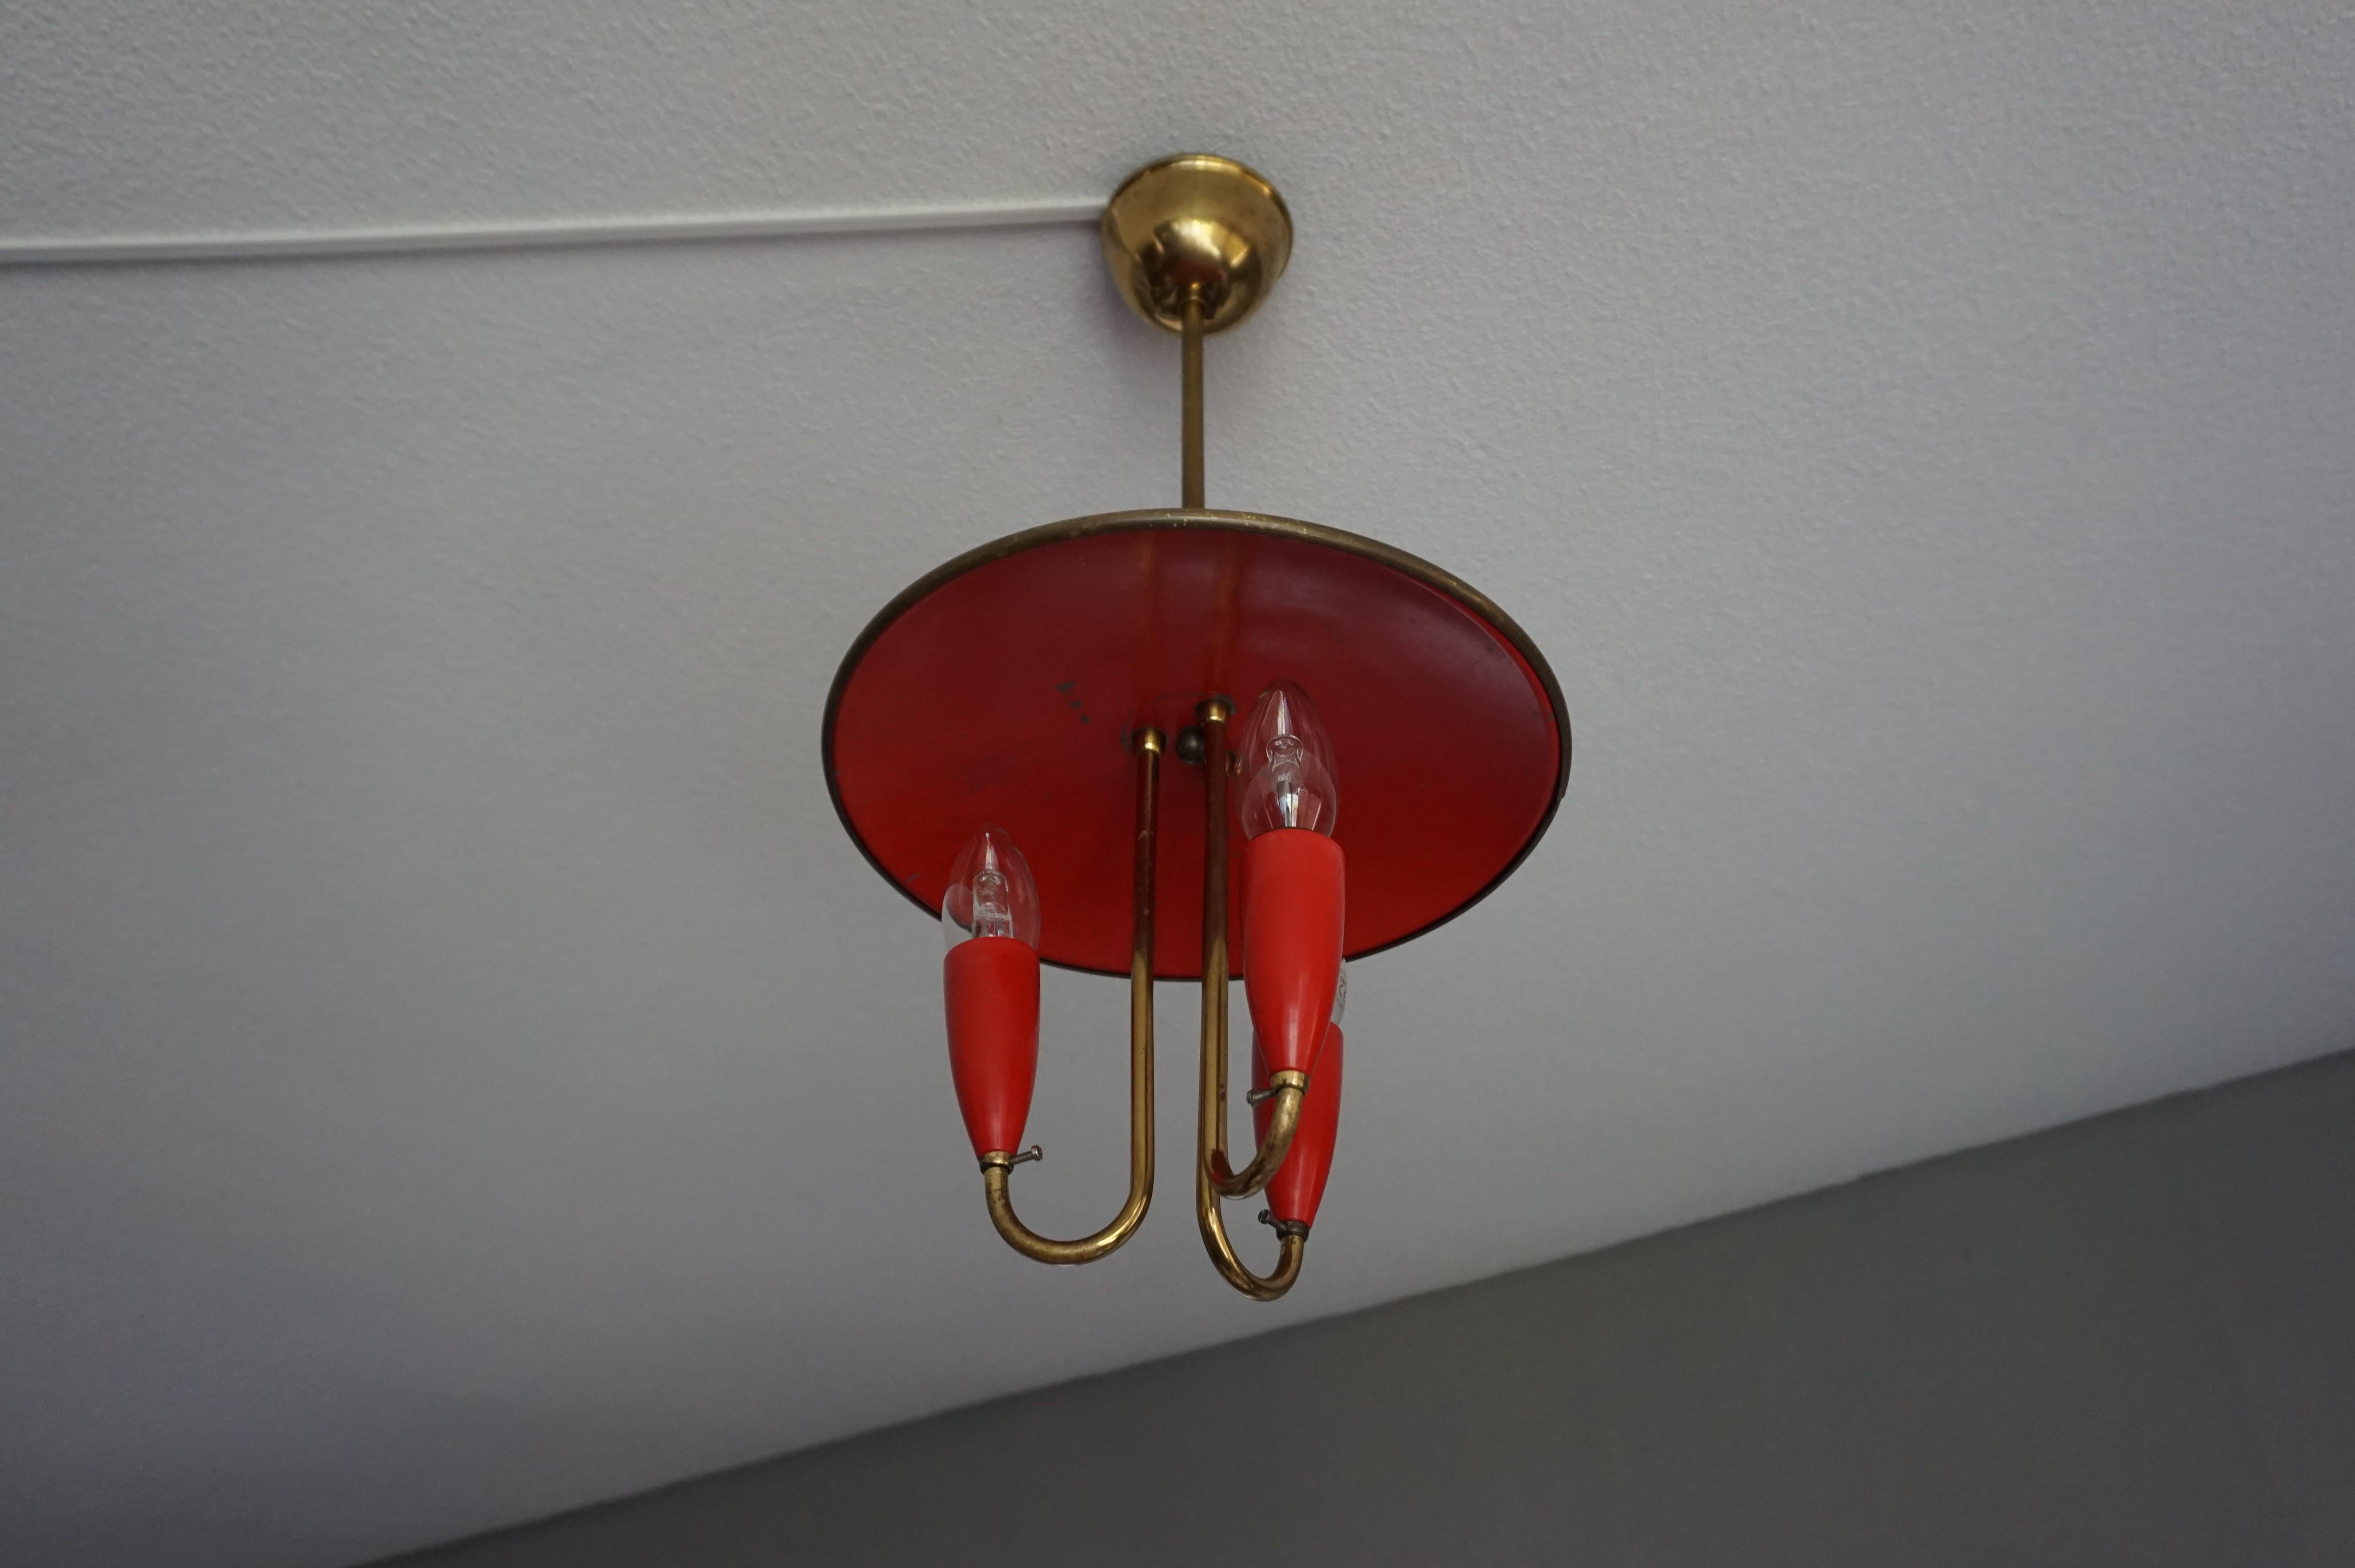 Hand-Crafted Small and Stylish Mid-Century Modern Brass and Red Bakelite Chandelier / Pendant